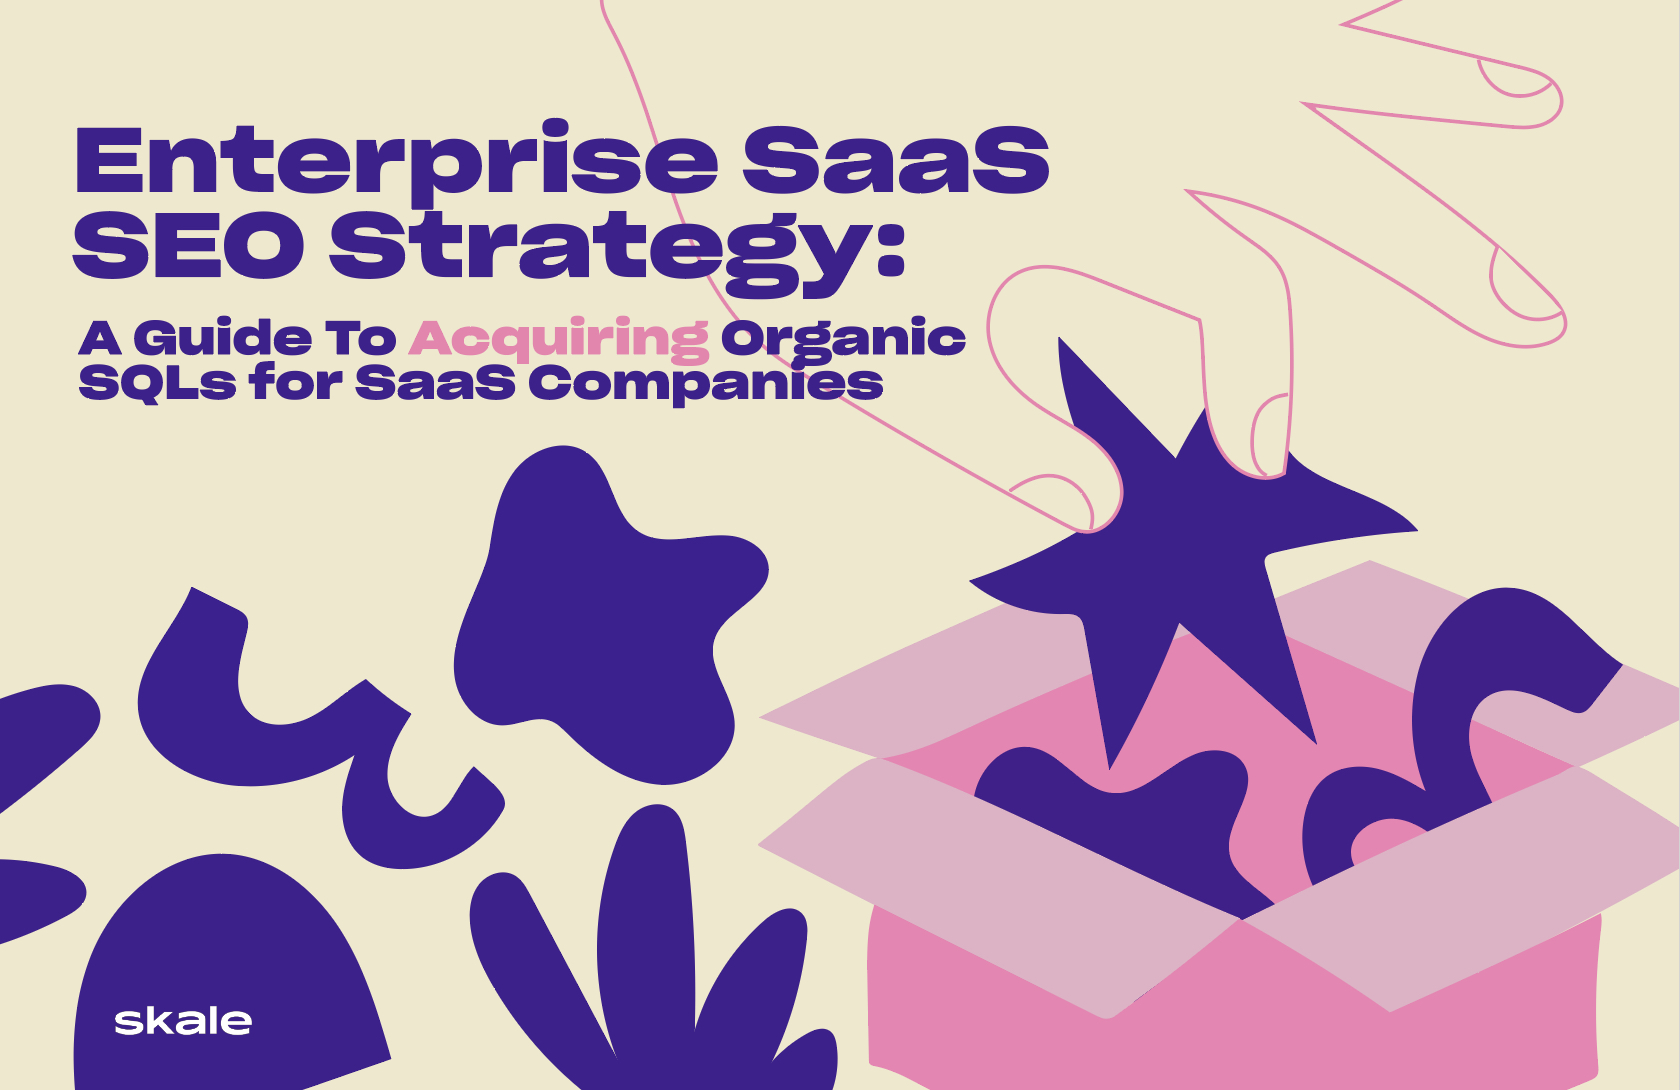 Enterprise SaaS SEO Strategy: A Guide to Acquiring Organic SQLs for SaaS Companies